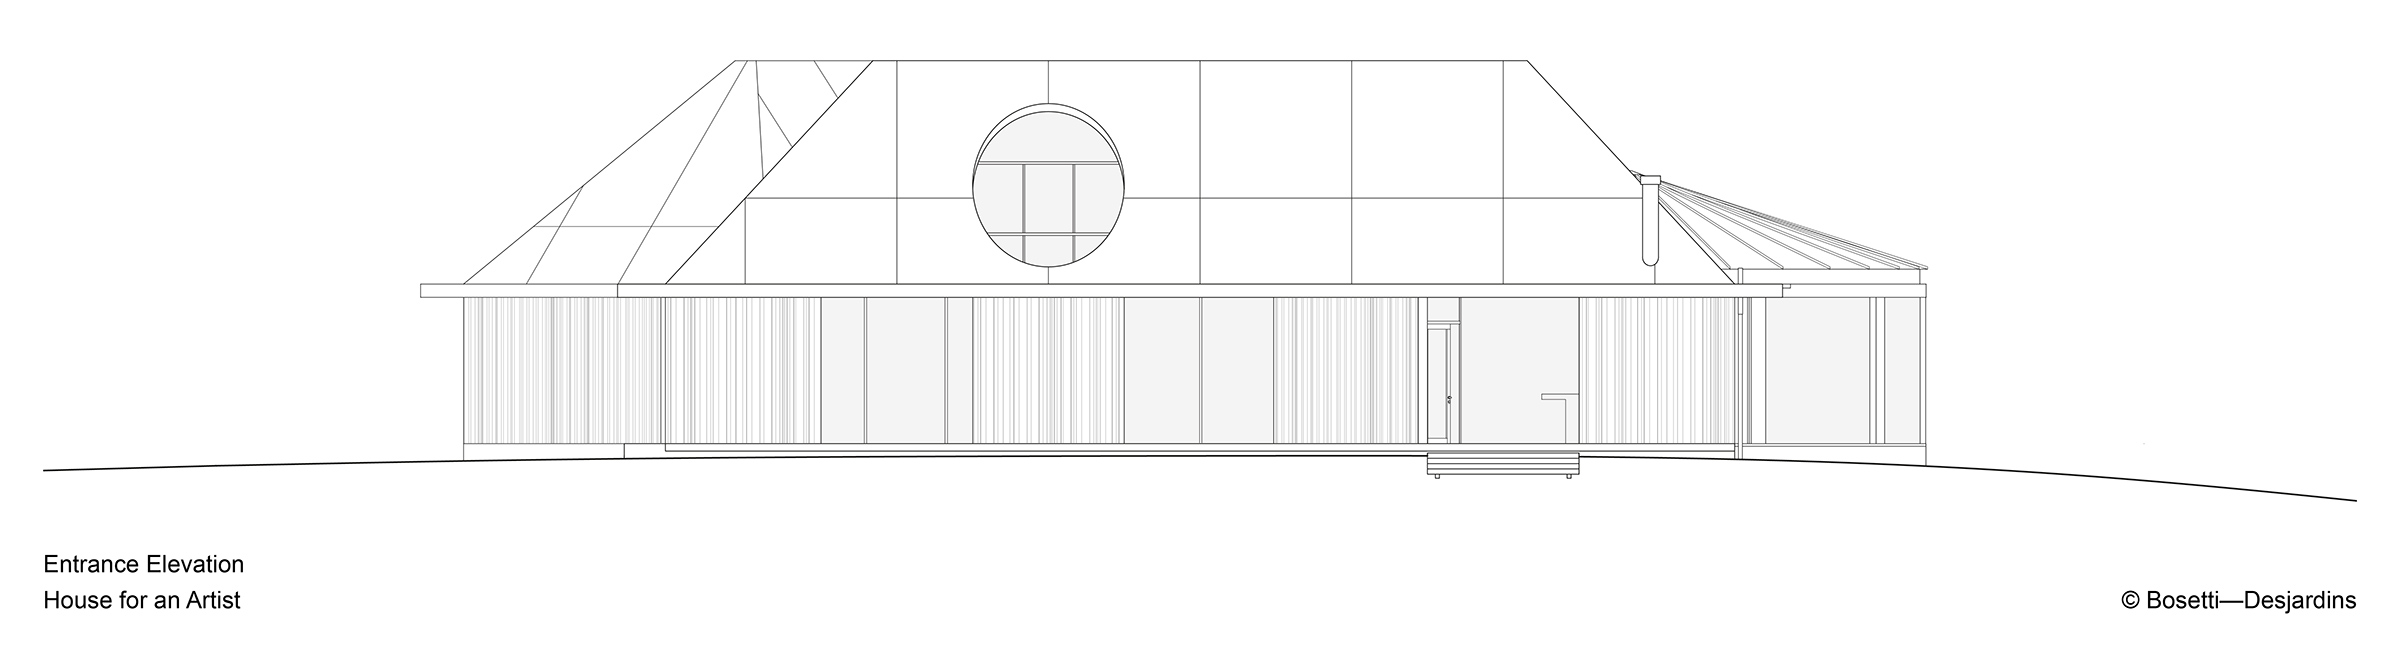 House_Drawing_Entrance-Elevation